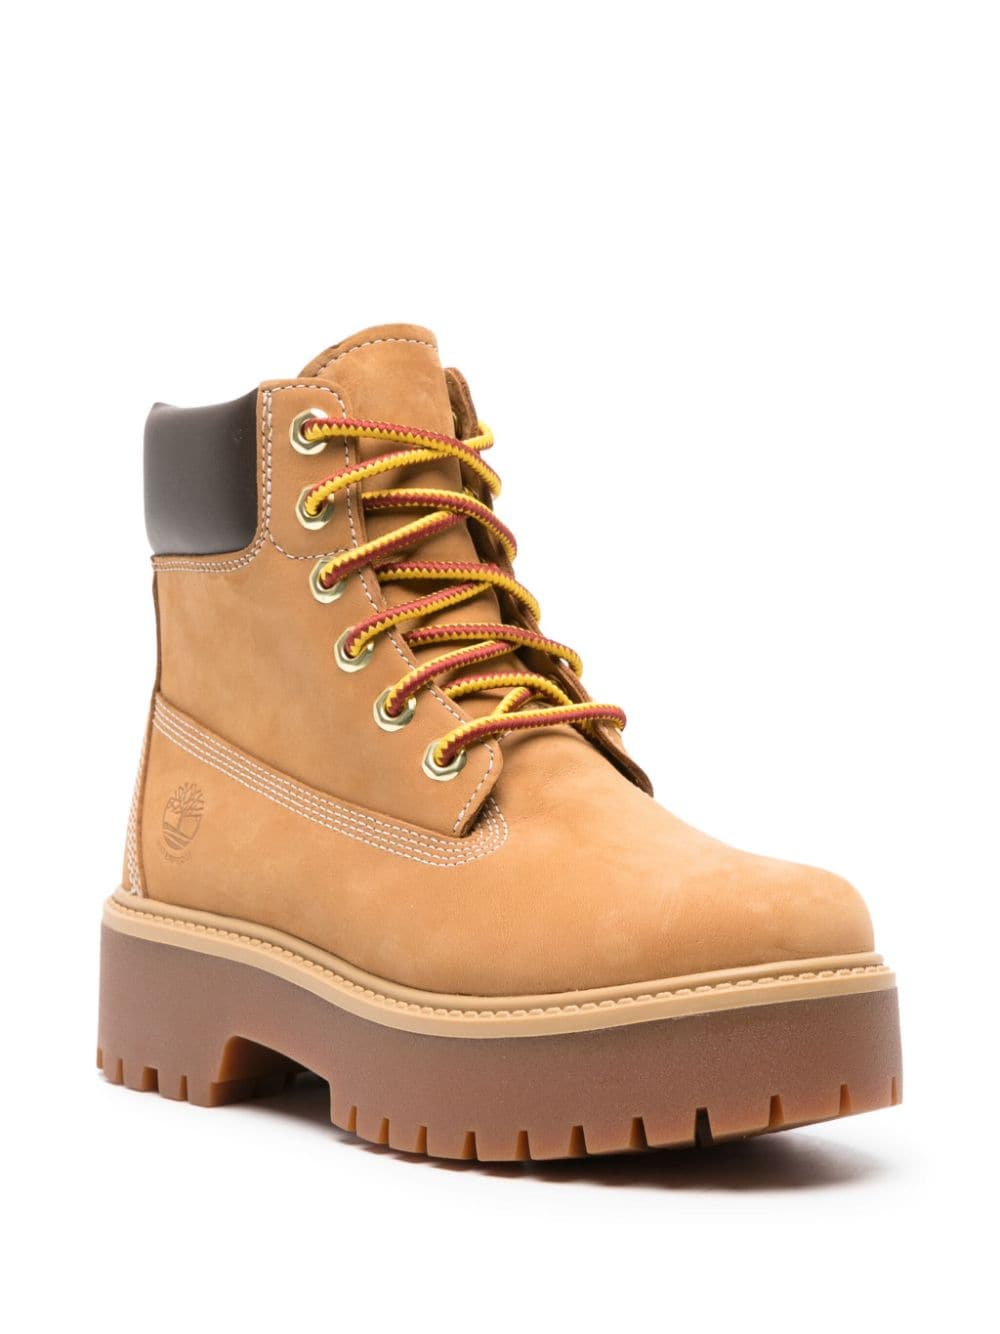 Timberland Stone Street leather boots - Beige